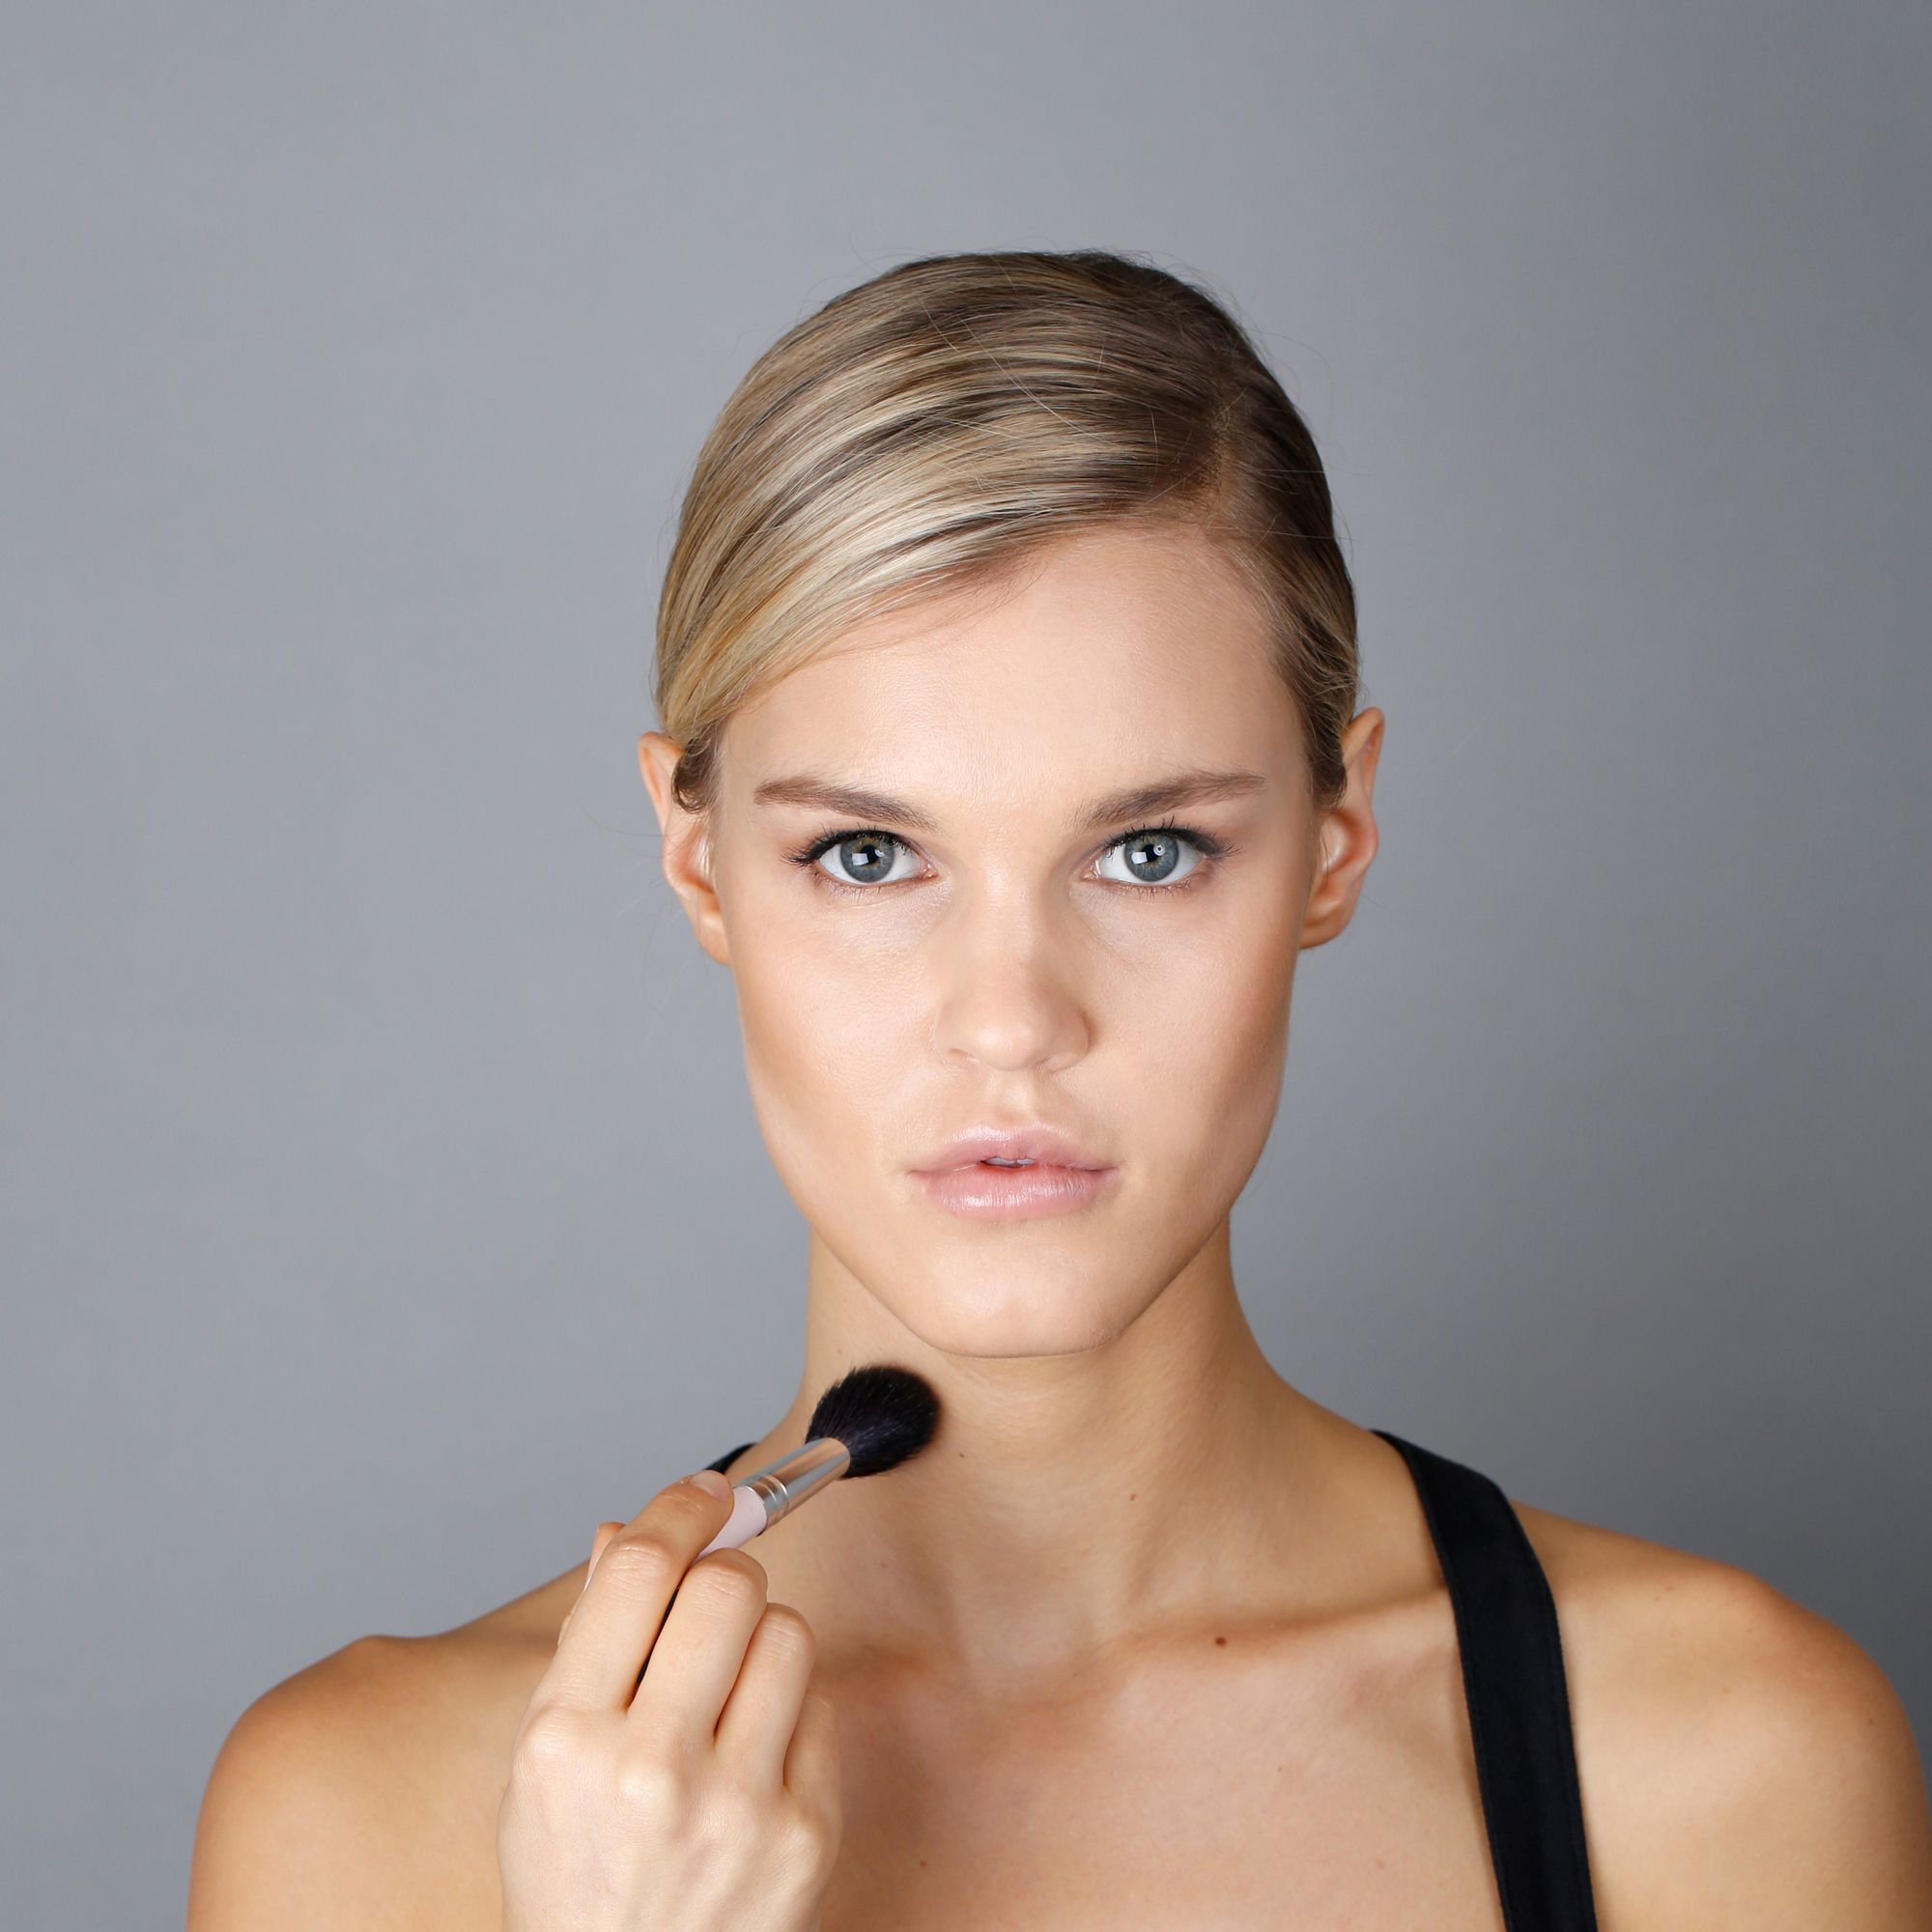 Does Contour BEFORE Foundation REALLY work?